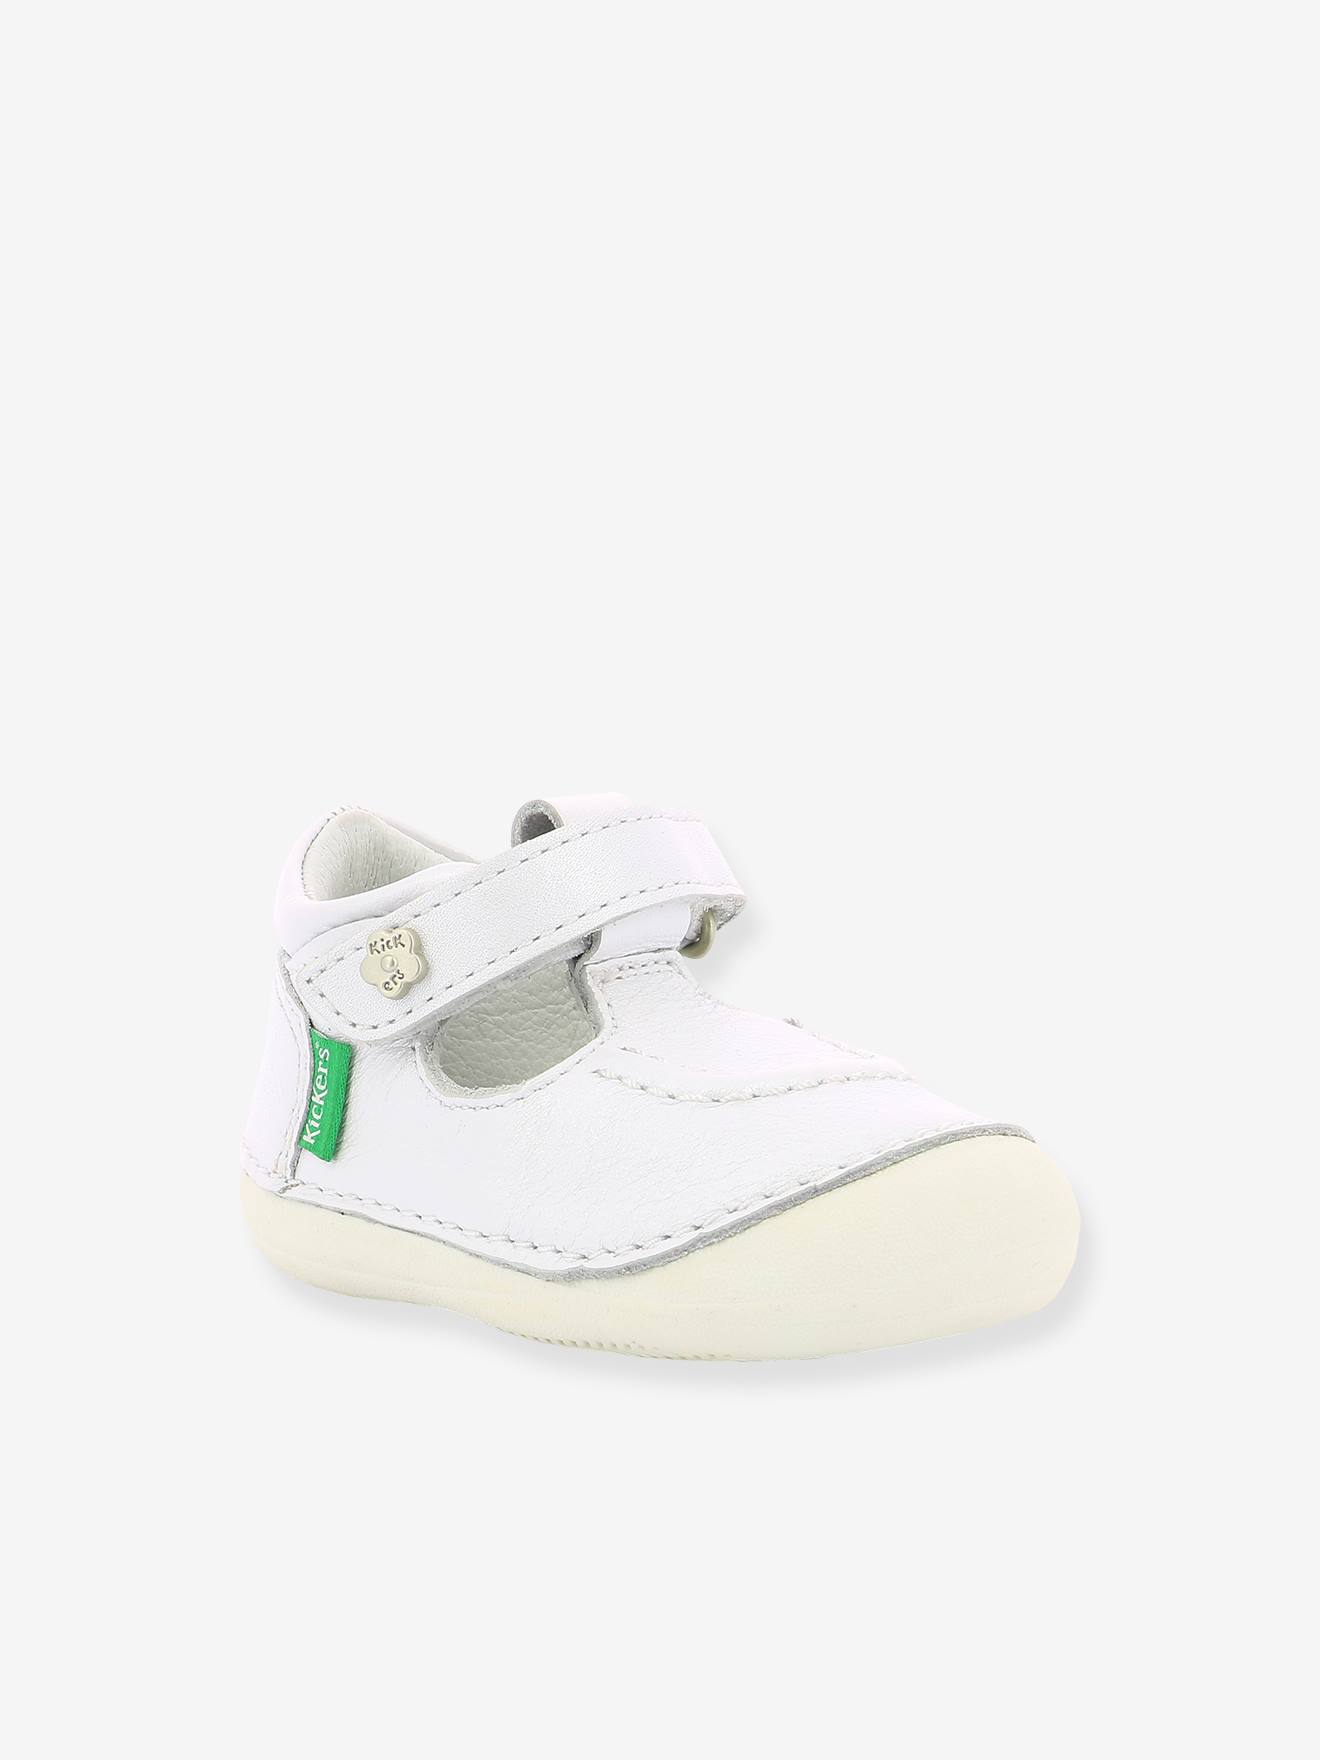 Sandales Cuir Bebe Fille Salome Kickers 1ers Pas Blanc Chaussures